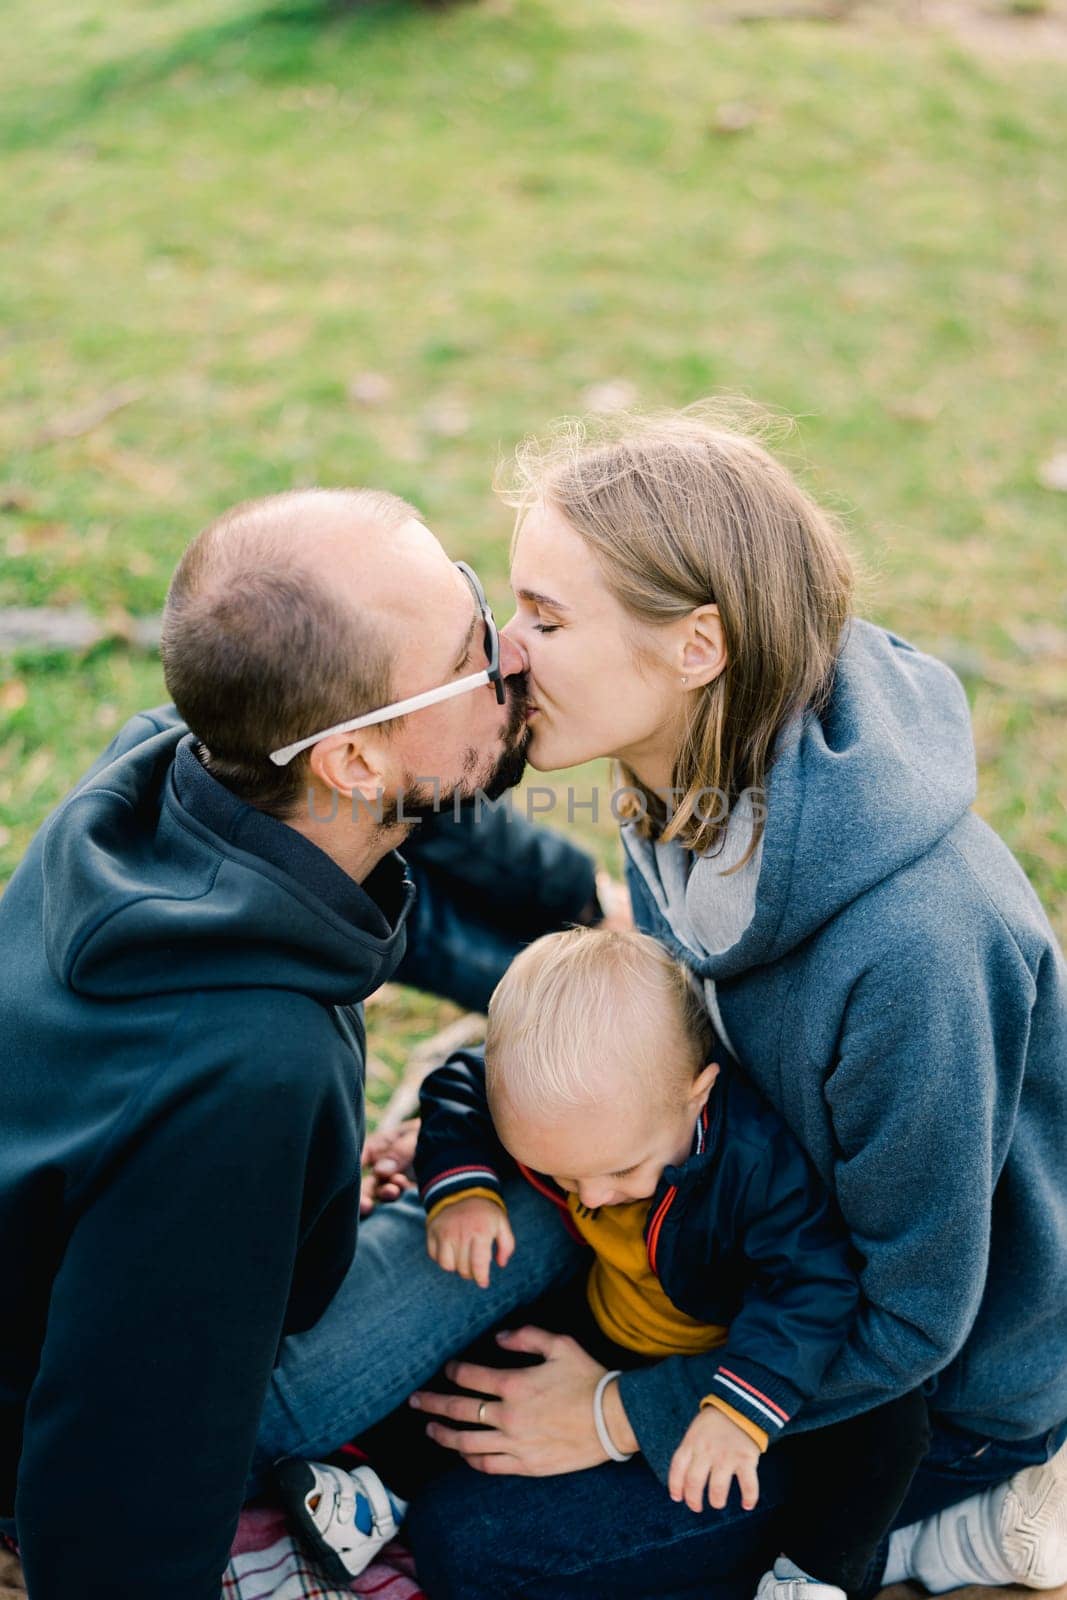 Dad kisses mom with a little boy on her lap while sitting on a green lawn by Nadtochiy